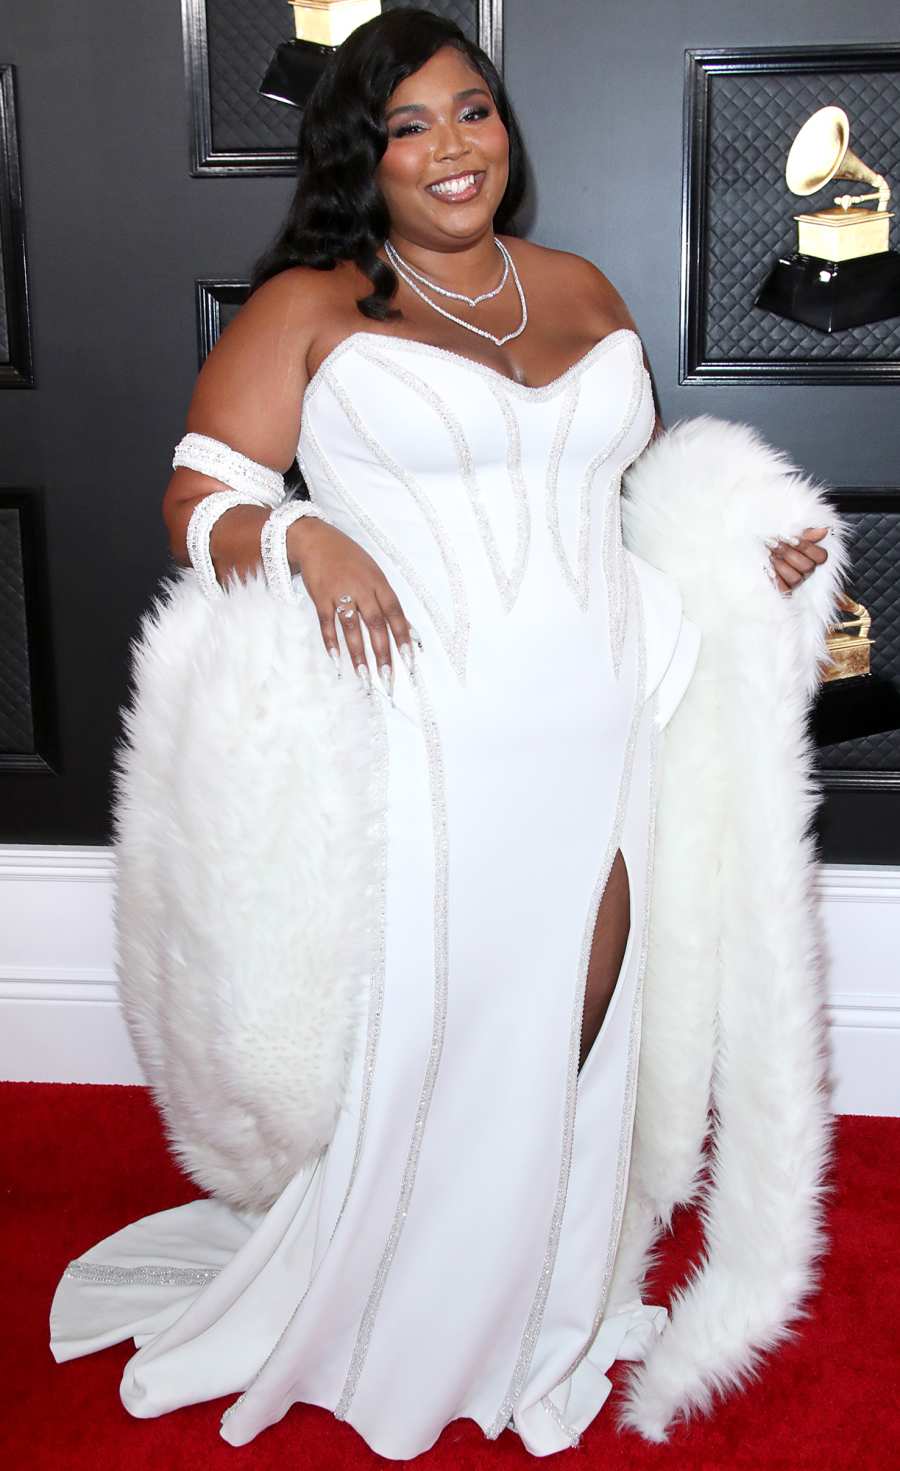 How Lizzo Prioritizes Her Self-Care to Manage Anxiety